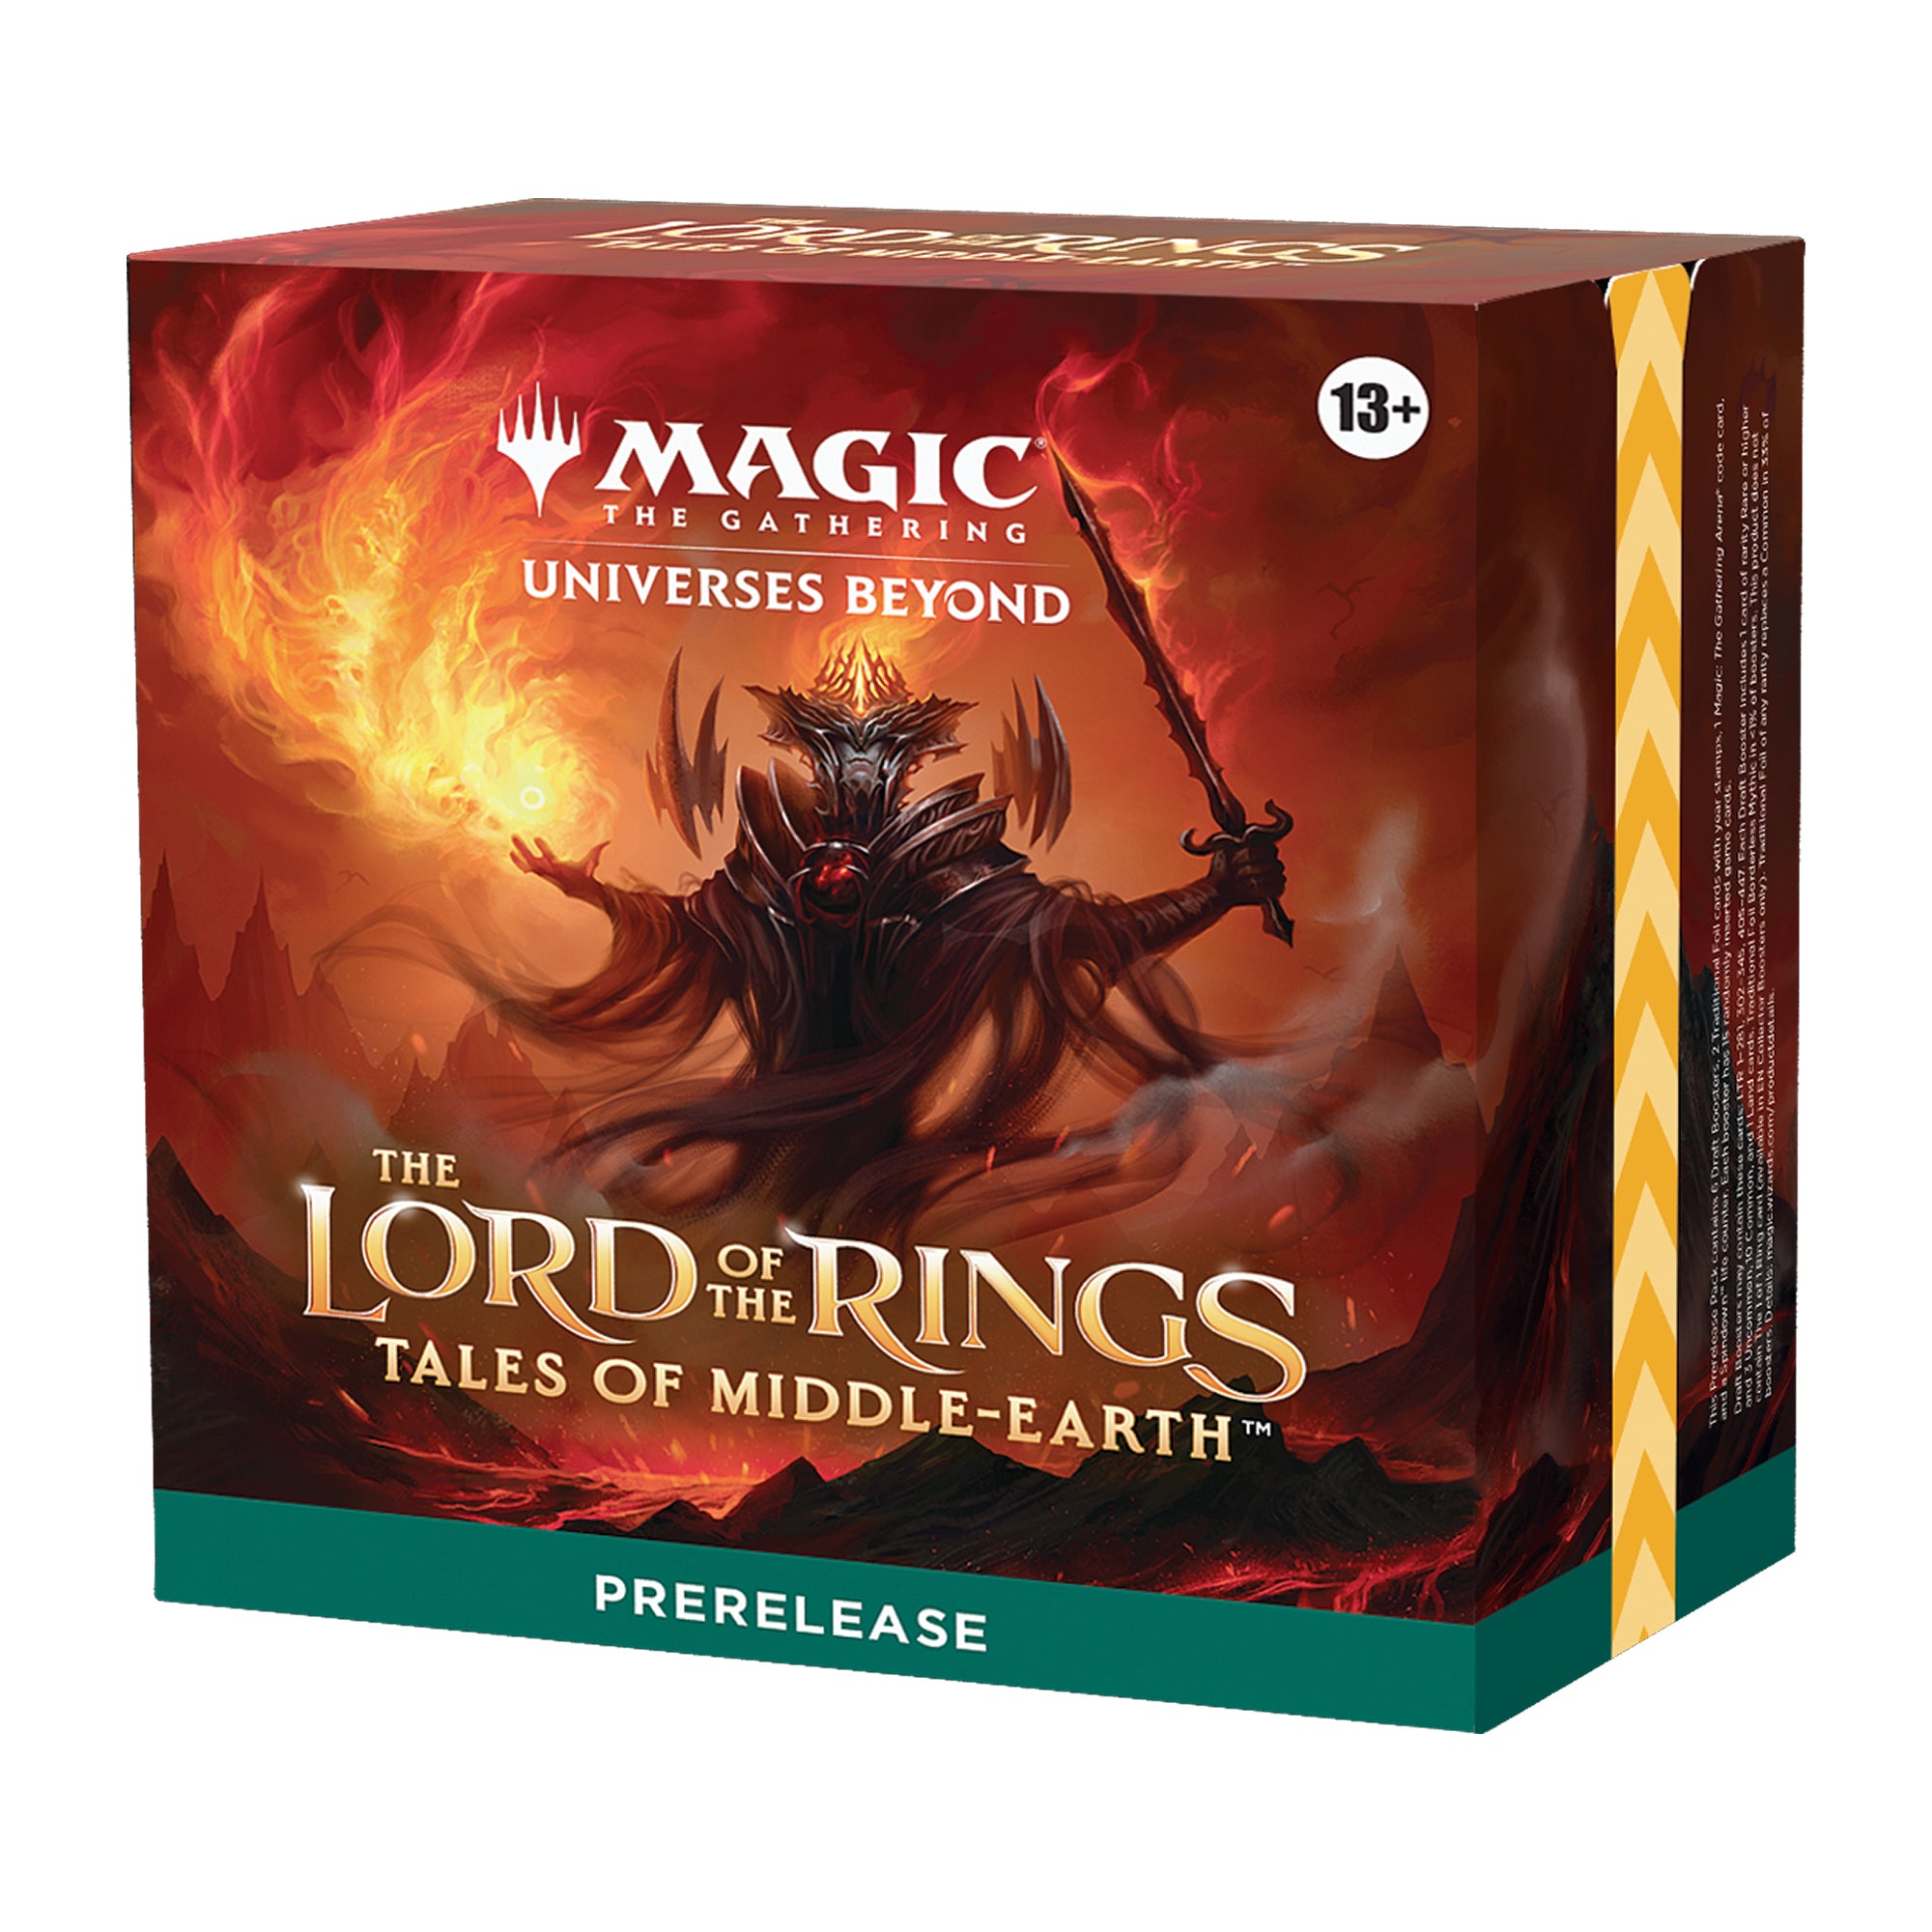 The Lord of the Rings: Tales of Middle-earth - Prerelease Kit | Shuffle n Cut Hobbies & Games